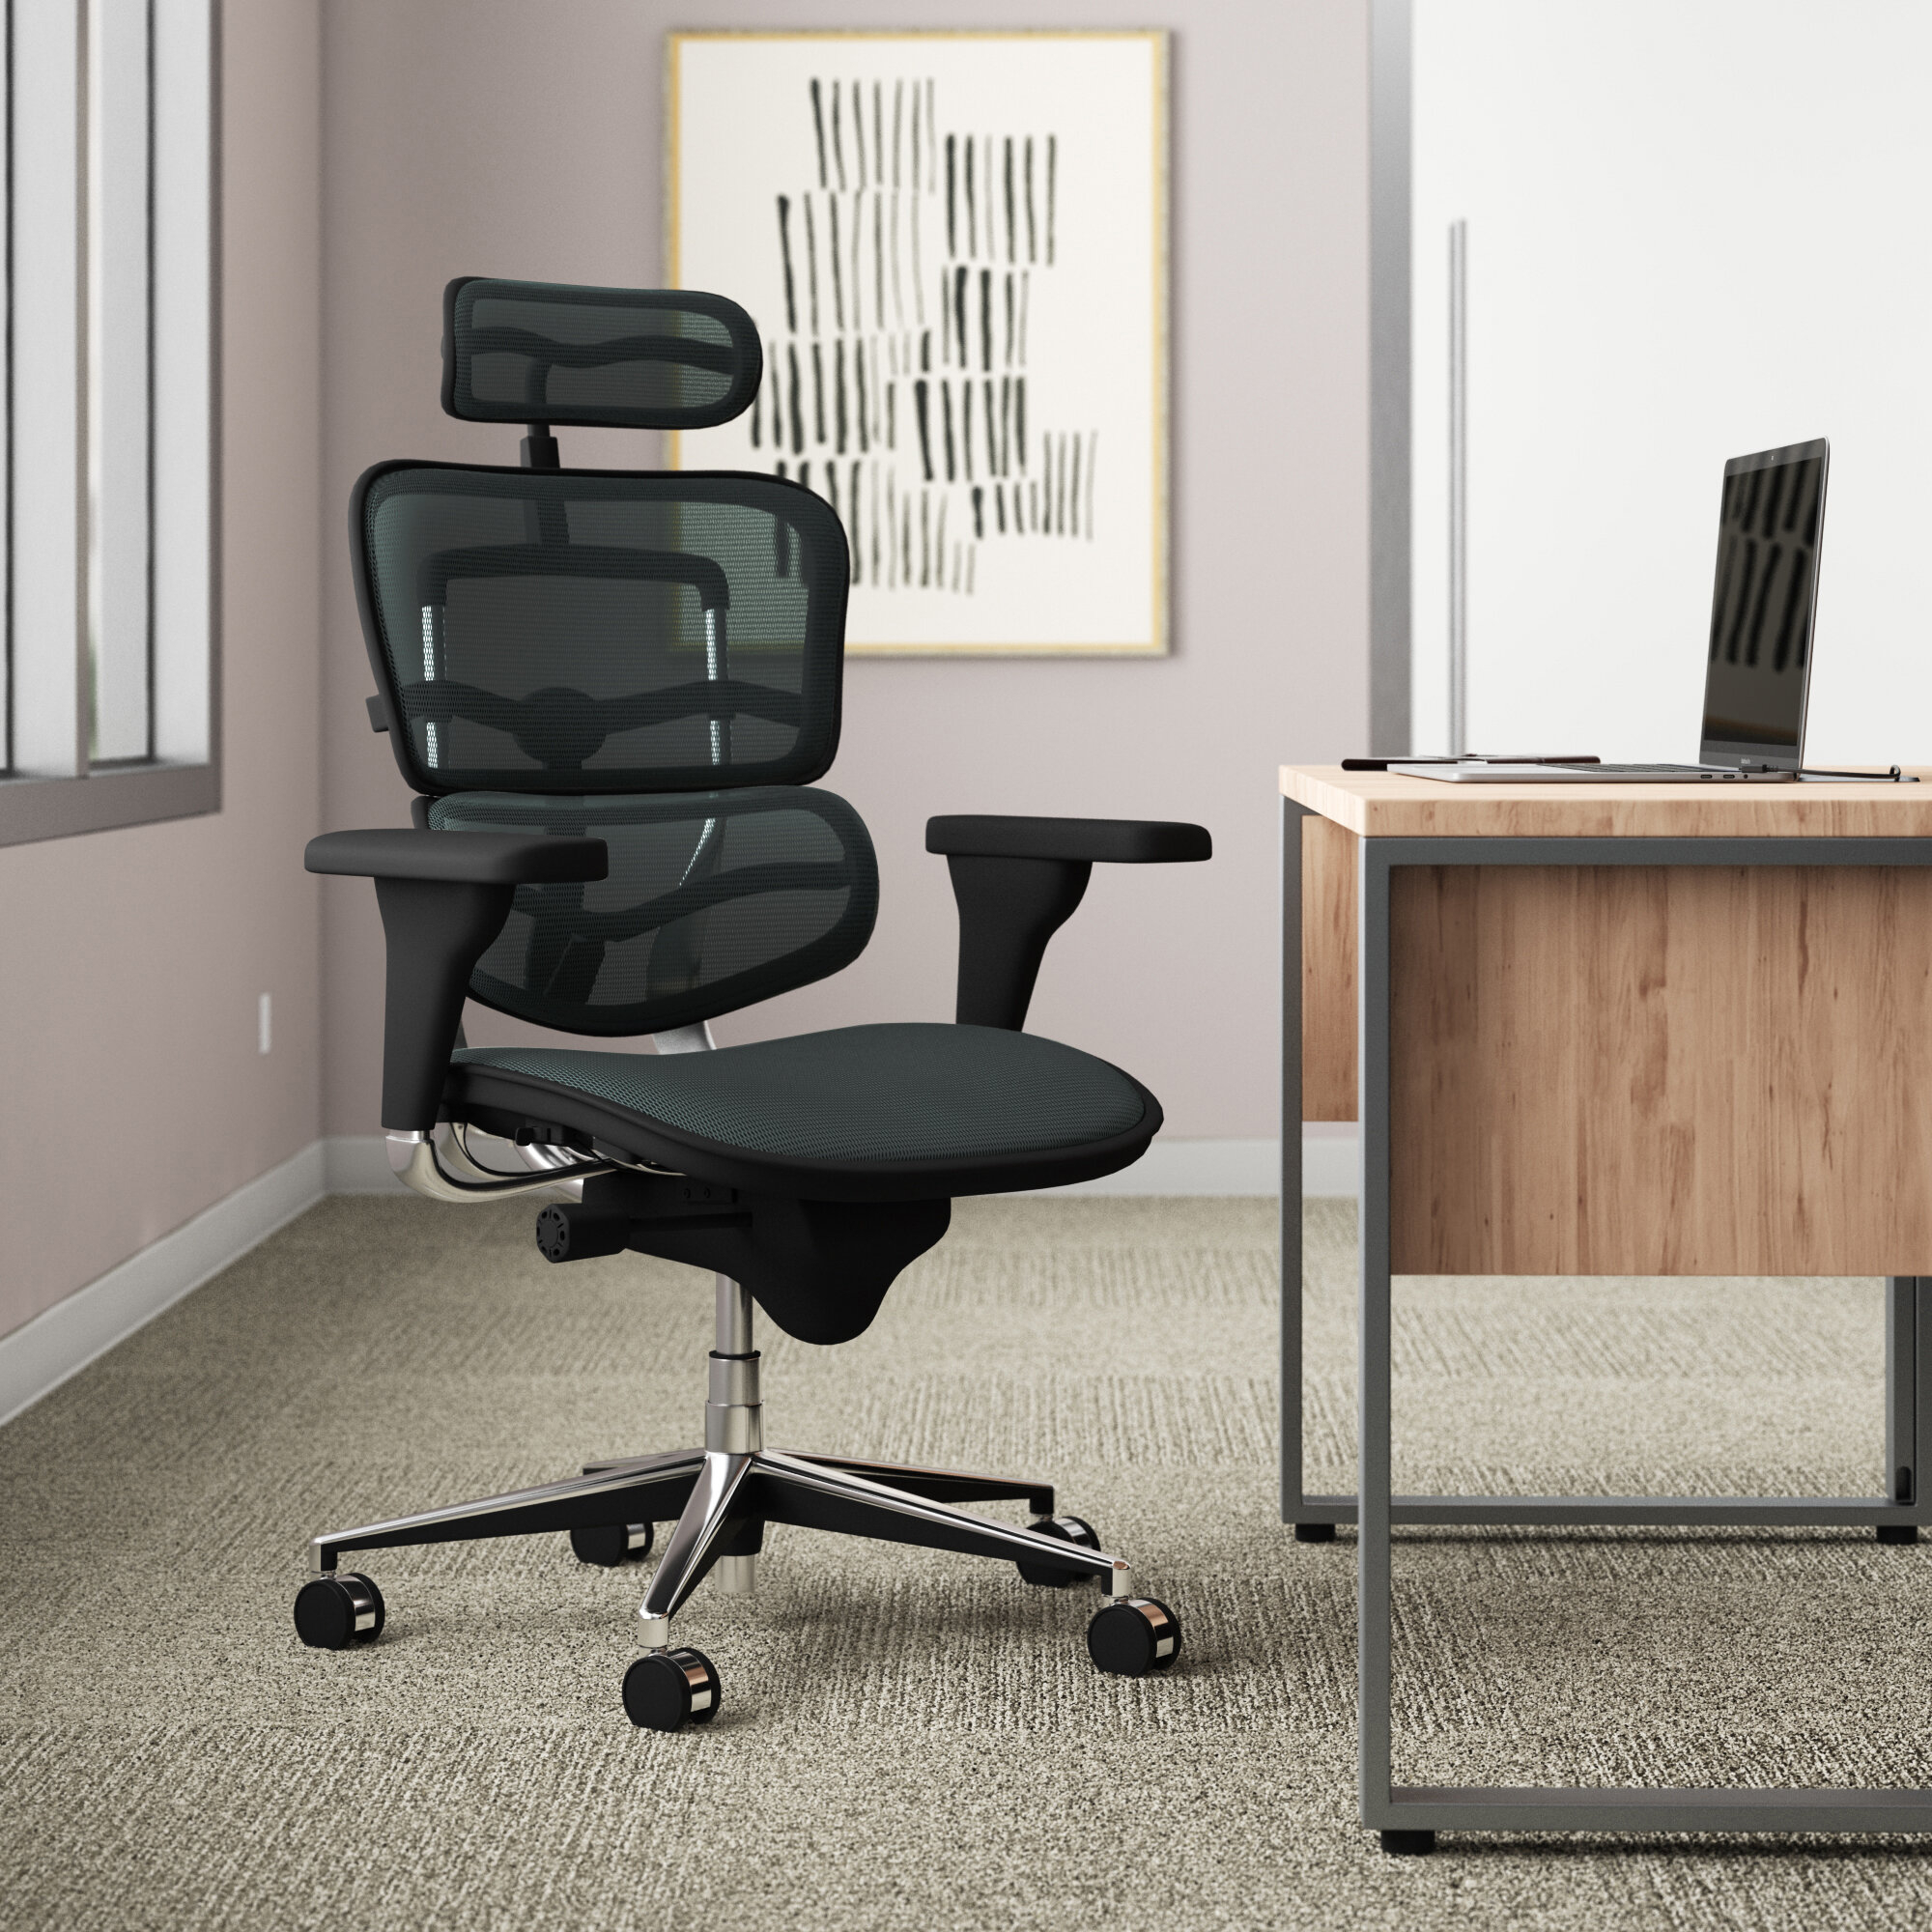 How to choose the right office chairs by Nathan (Xin) Wang - Issuu